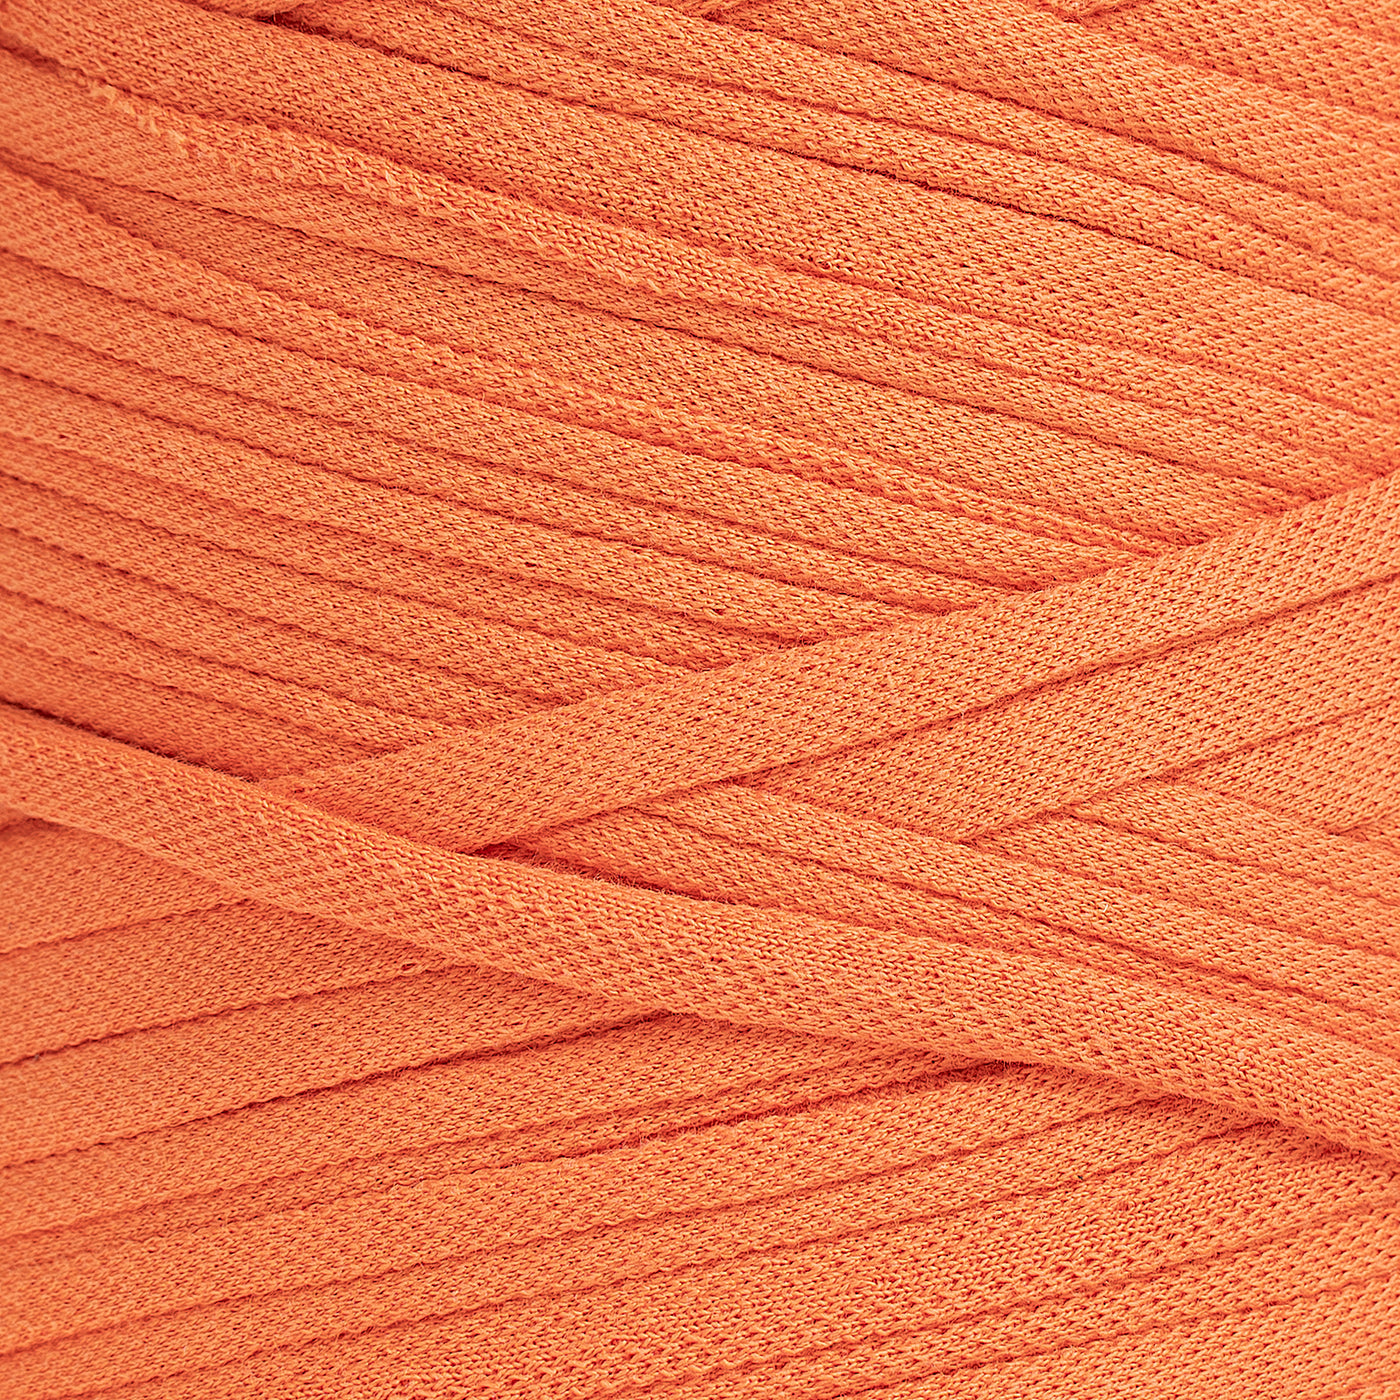 Recycled T-Shirt Fabric Yarn - Coral Color